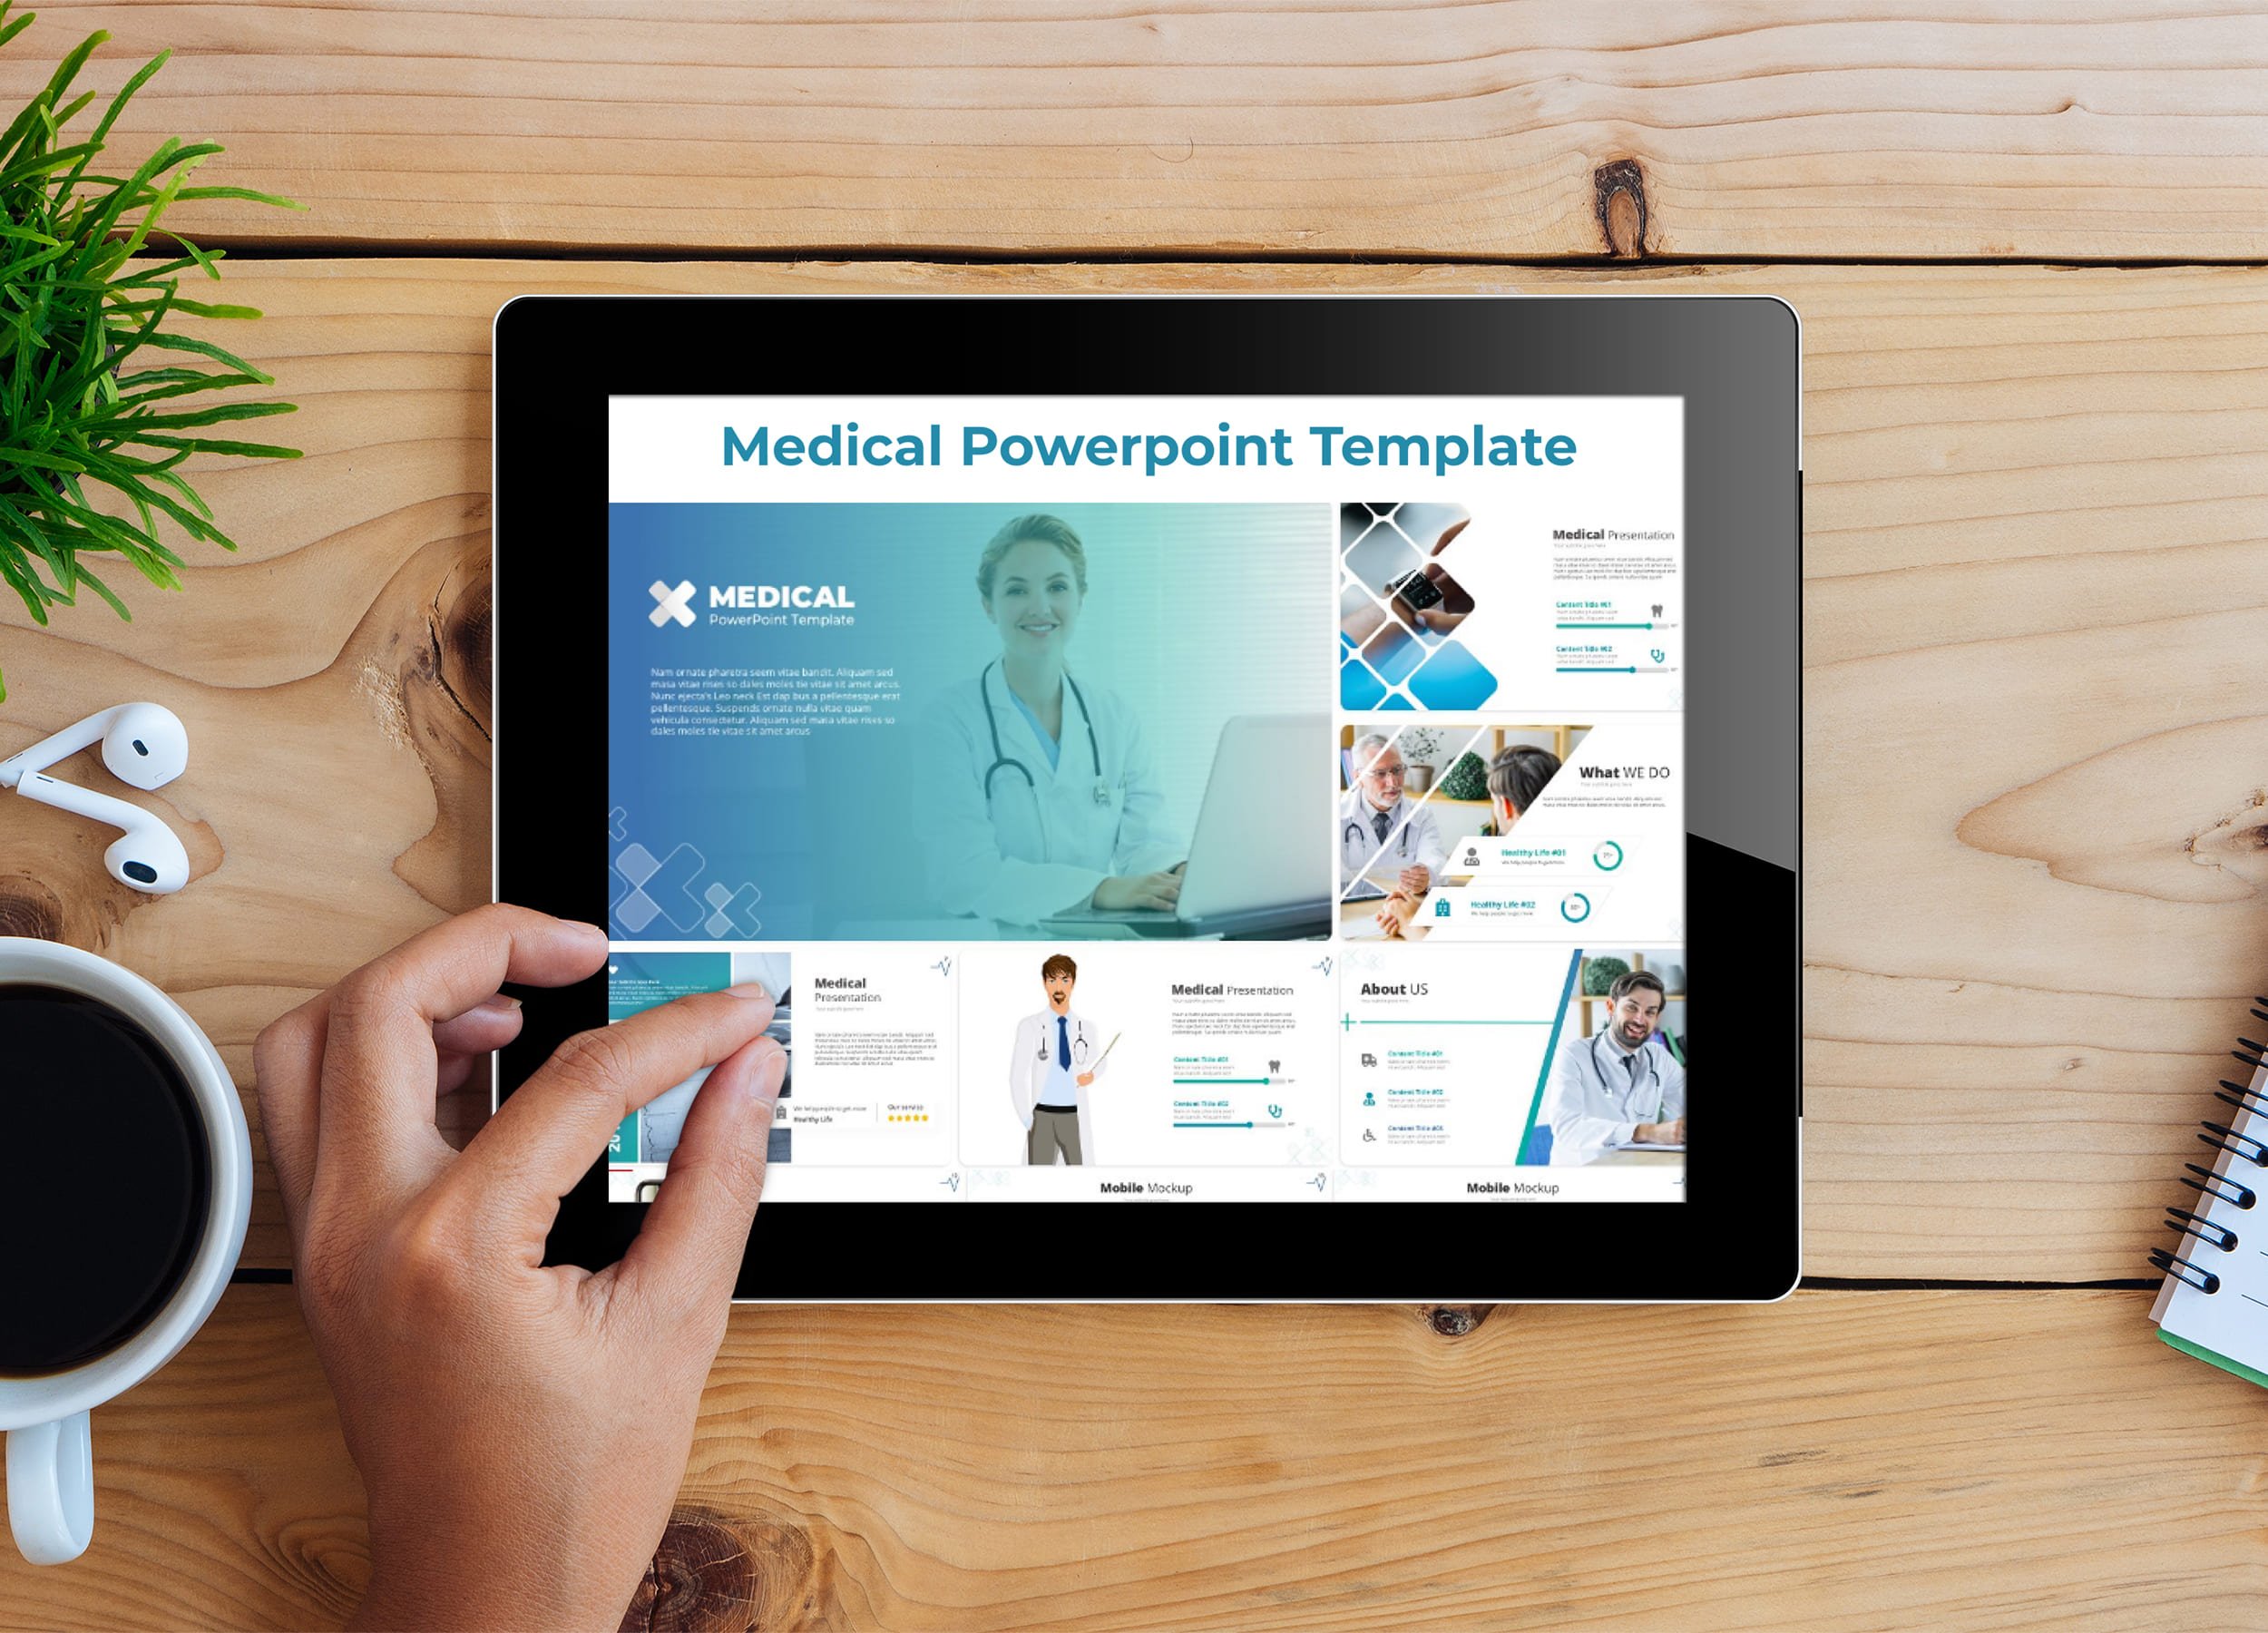 Tablet option of the Medical Powerpoint Template.